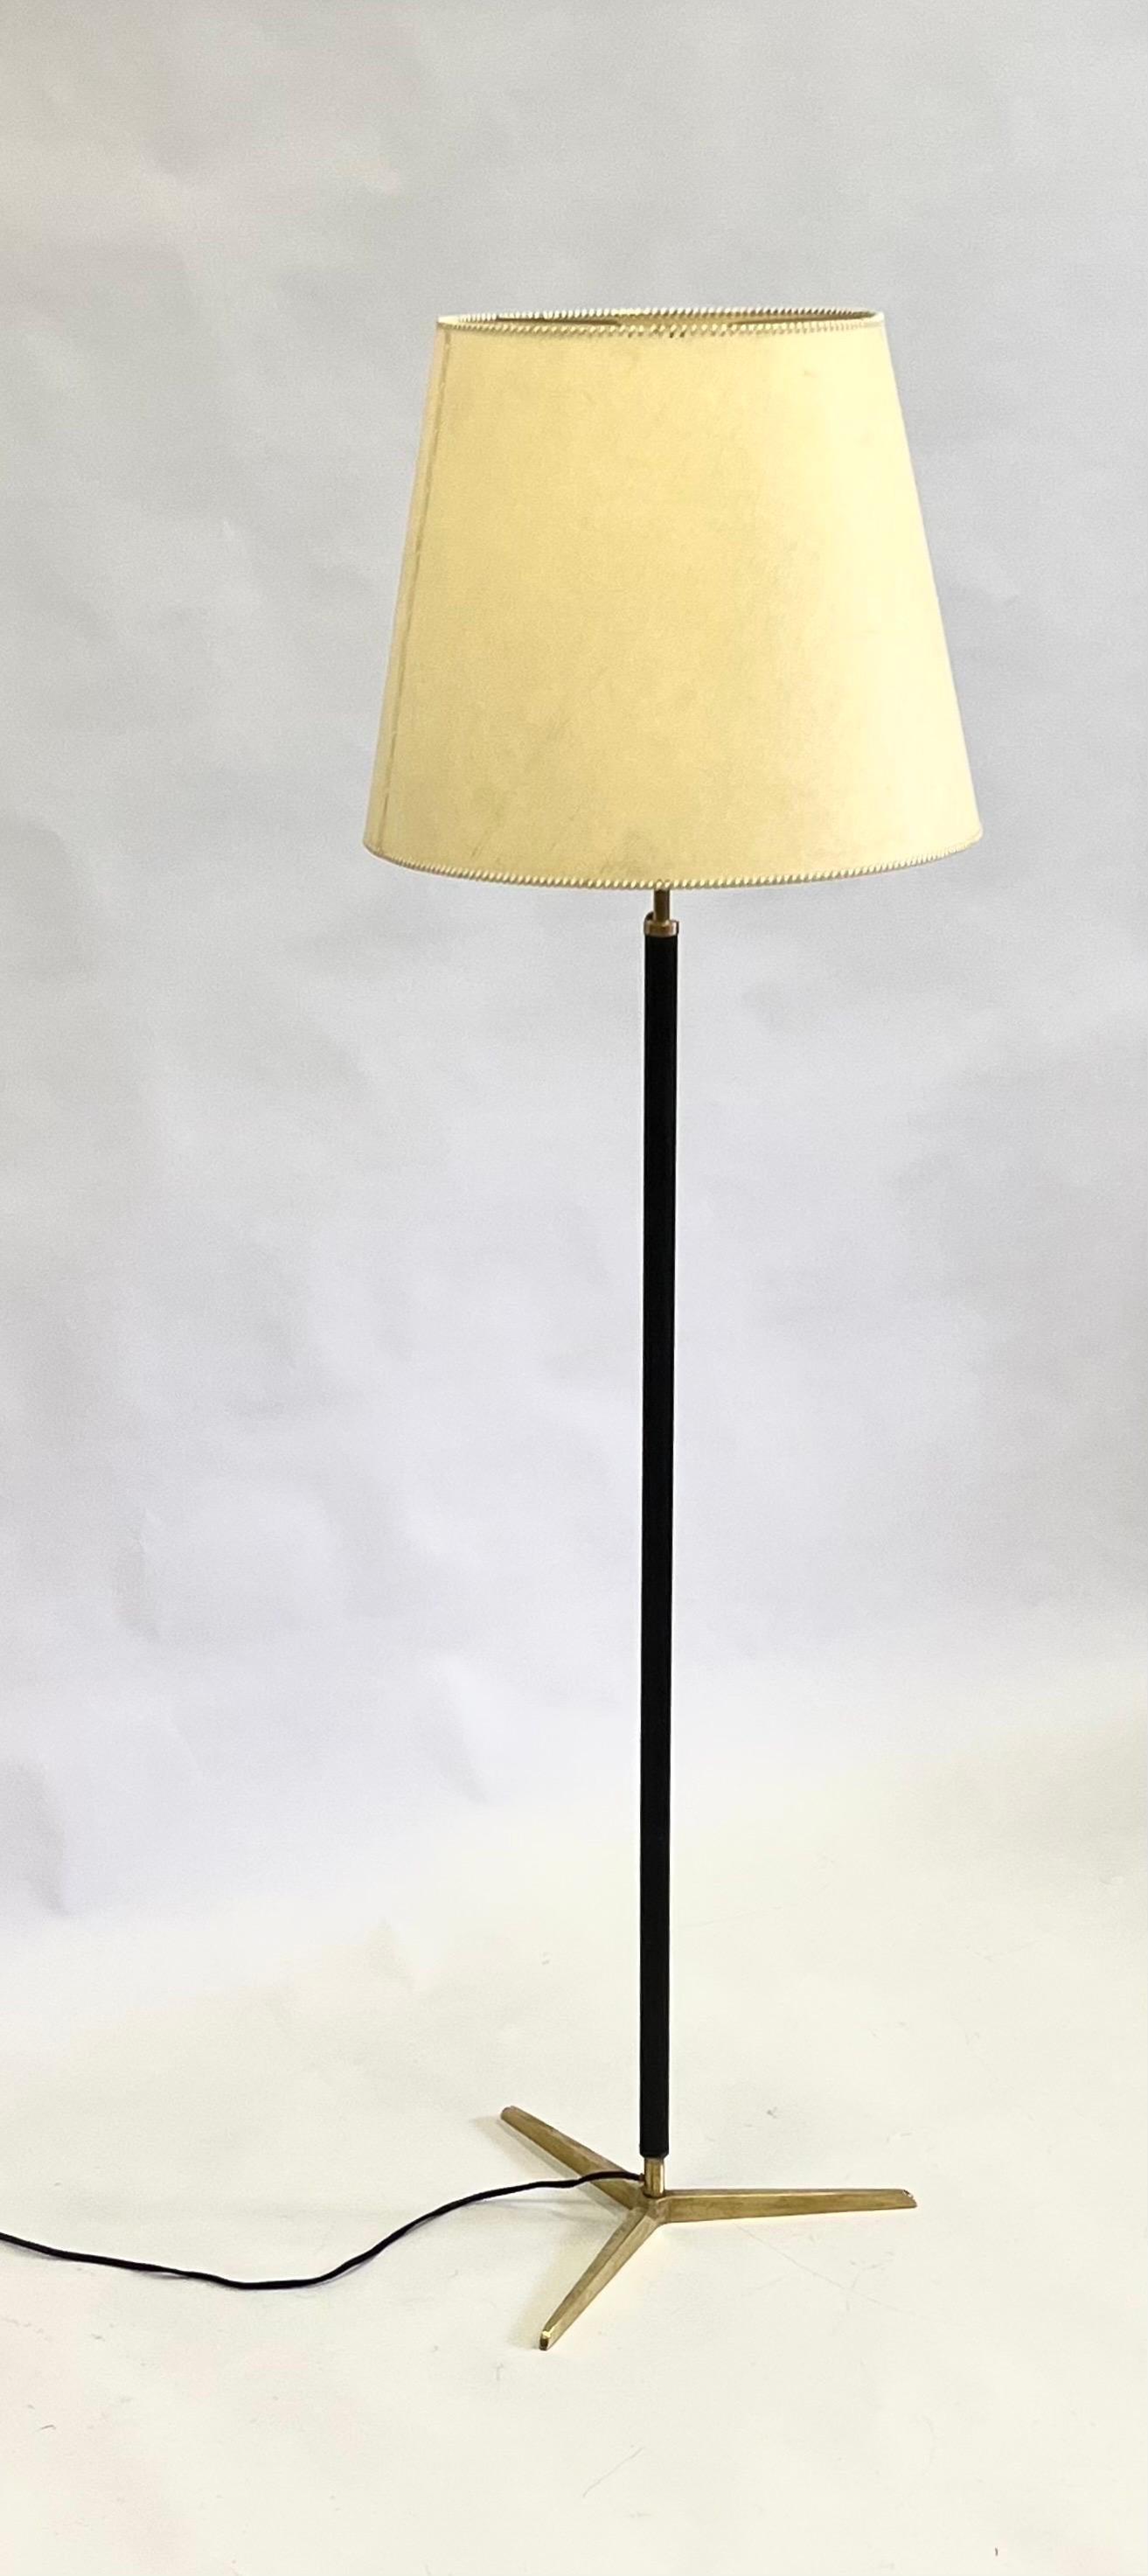 Hand-Knotted French Mid-Century Modern Hand Stitched Leather Floor Lamp Jacques Adnet For Sale